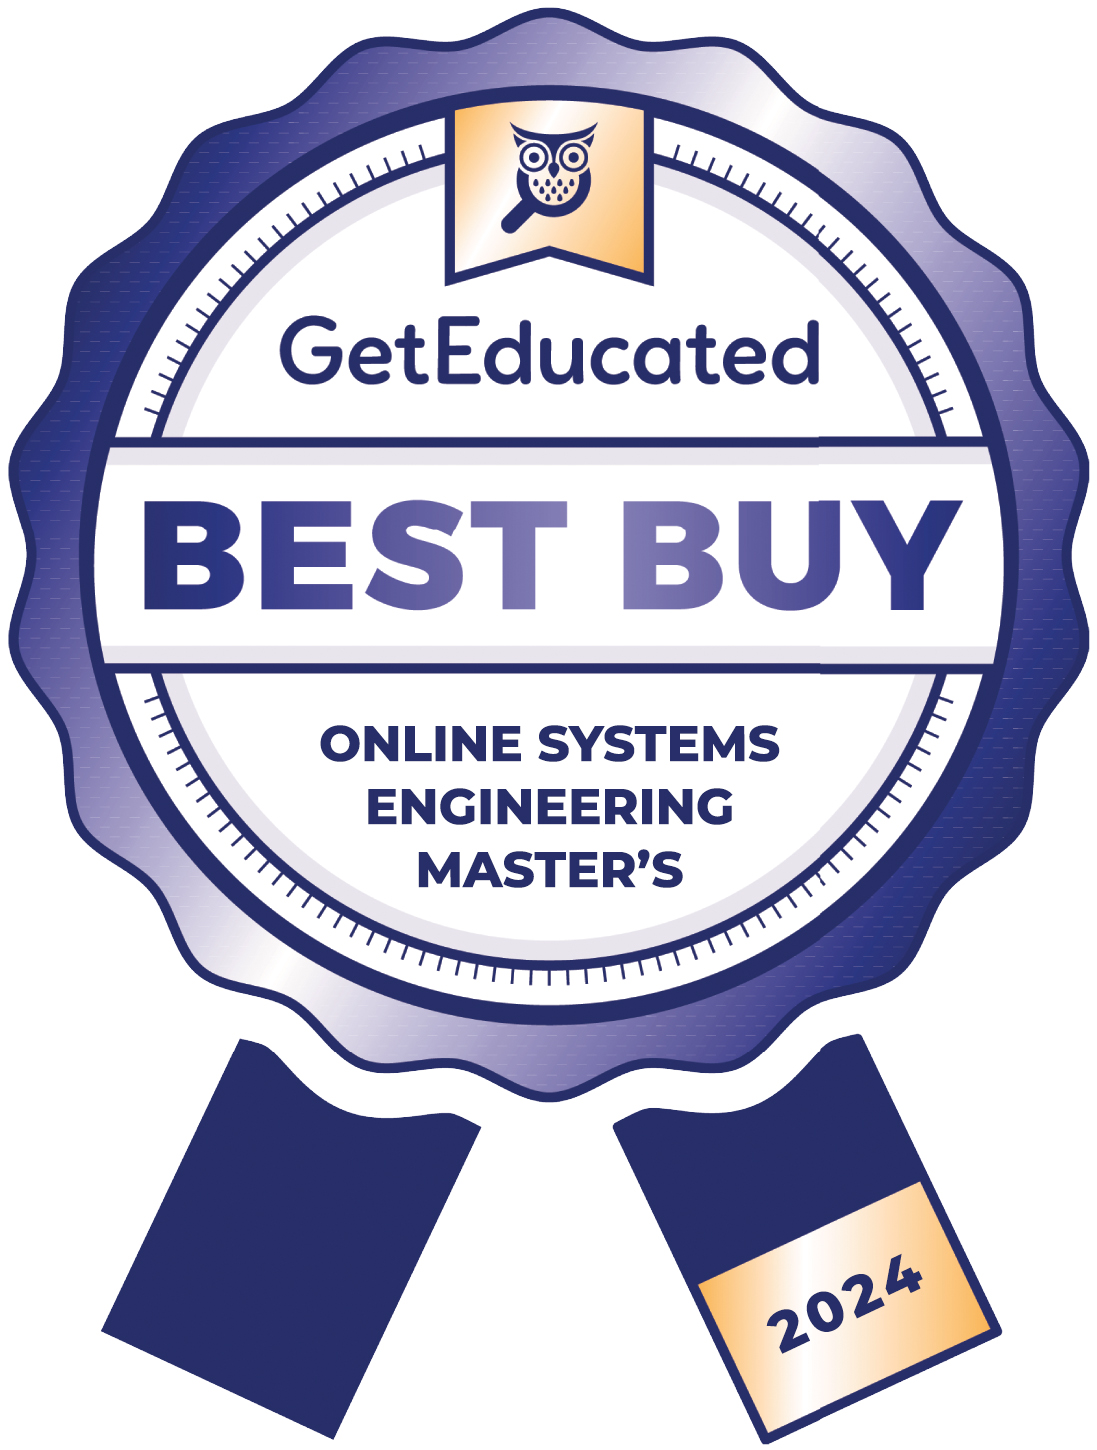 Rankings of the cheapest online systems engineering master's degrees